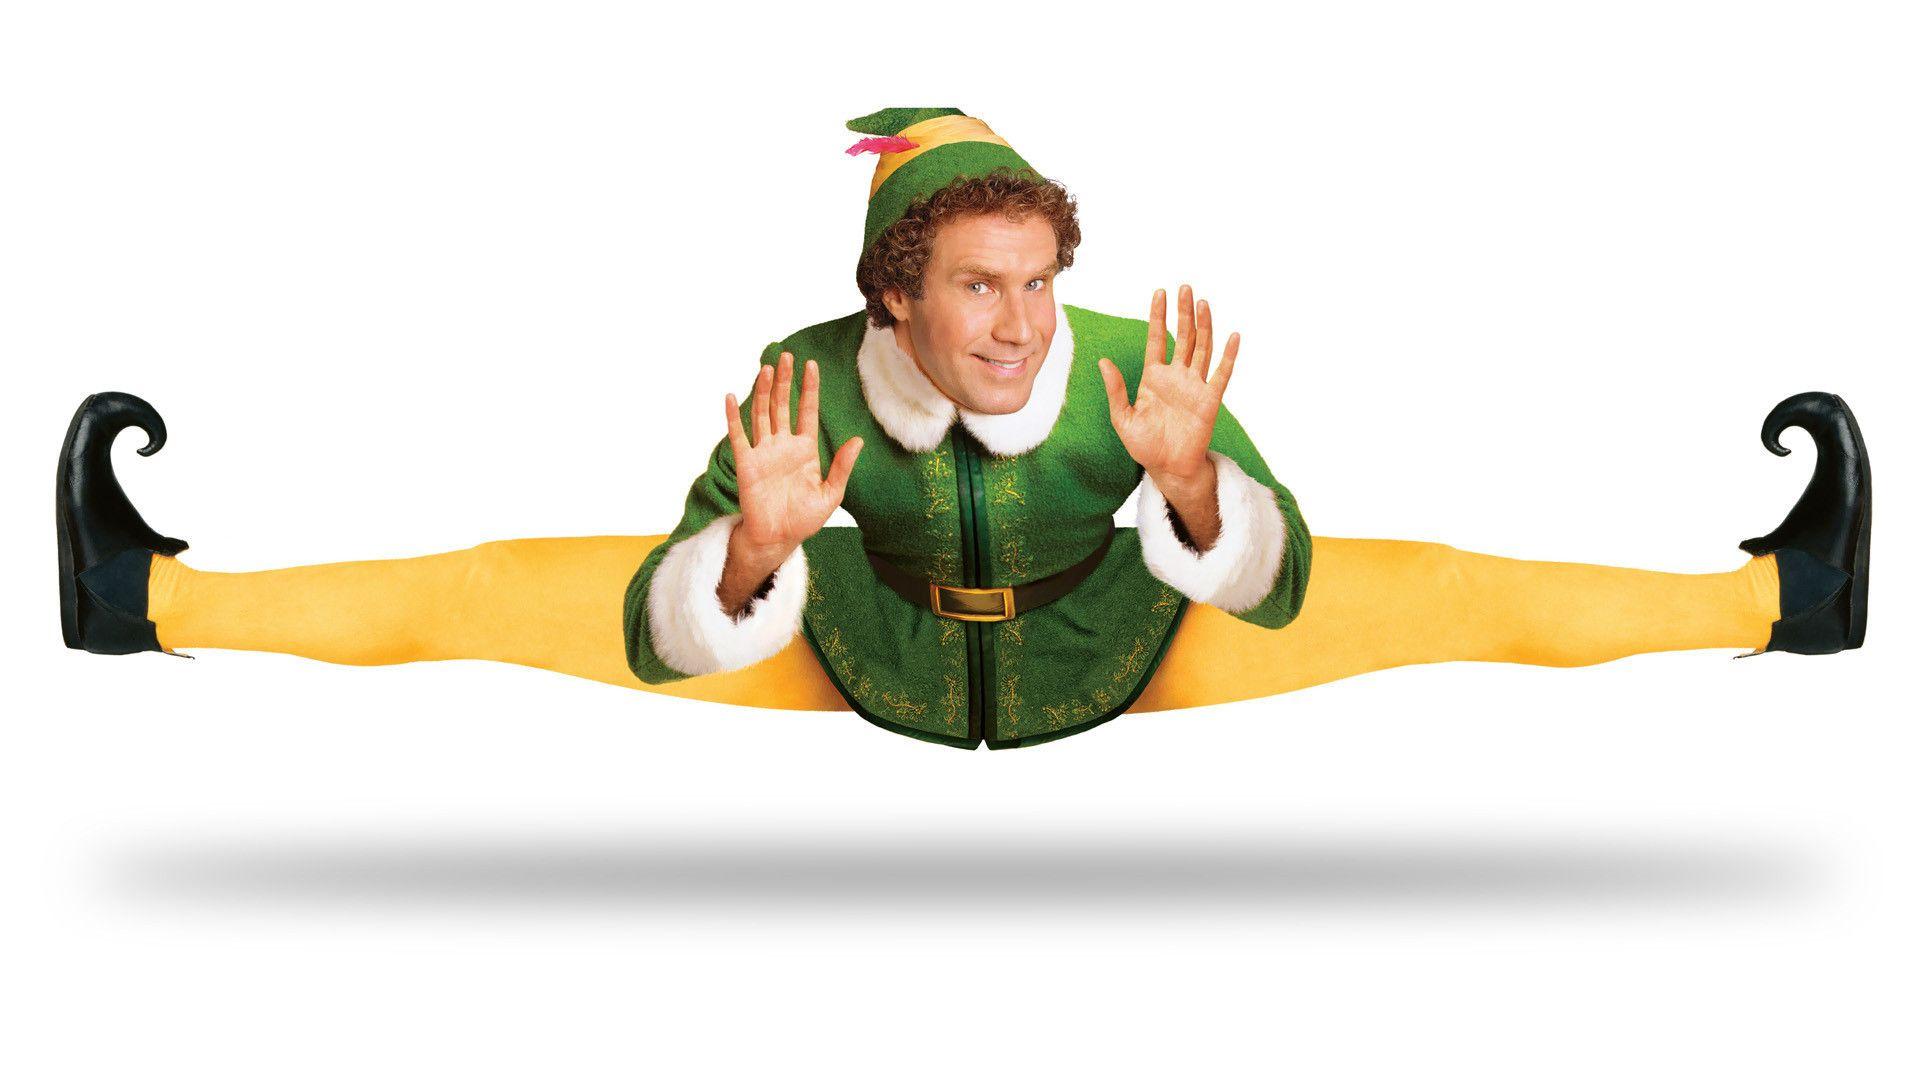 Download Get into the Christmas spirit with this cheerful Christmas Elf  Wallpaper  Wallpaperscom